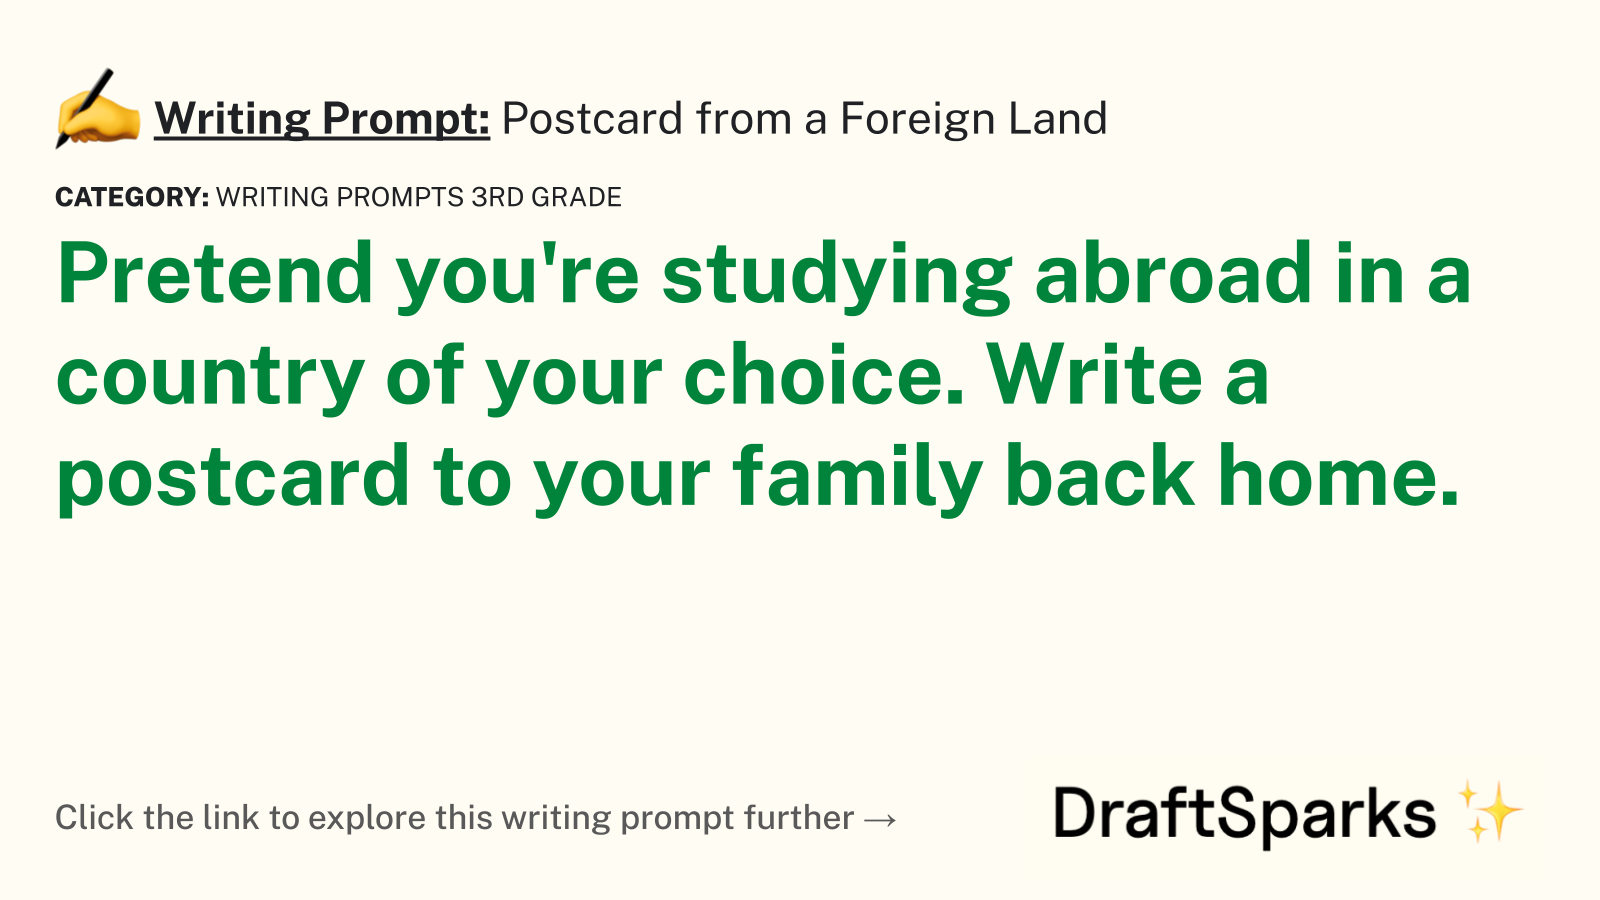 Postcard from a Foreign Land